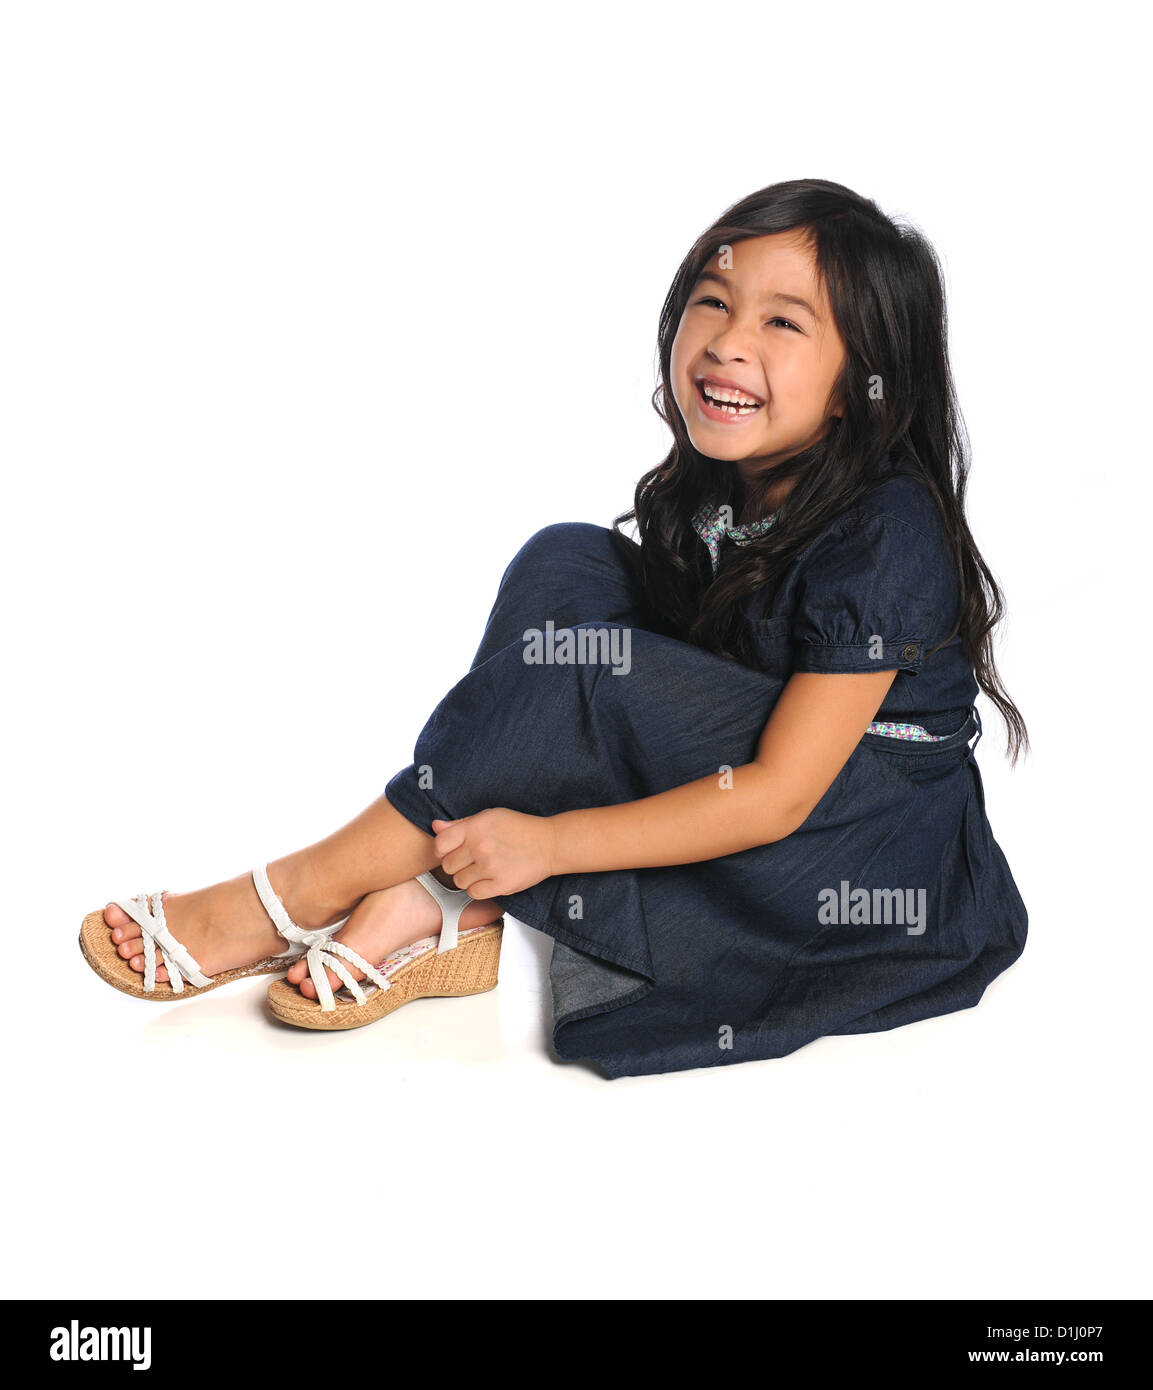 Portrait of Asian American girl smiling sitting over white background Stock Photo